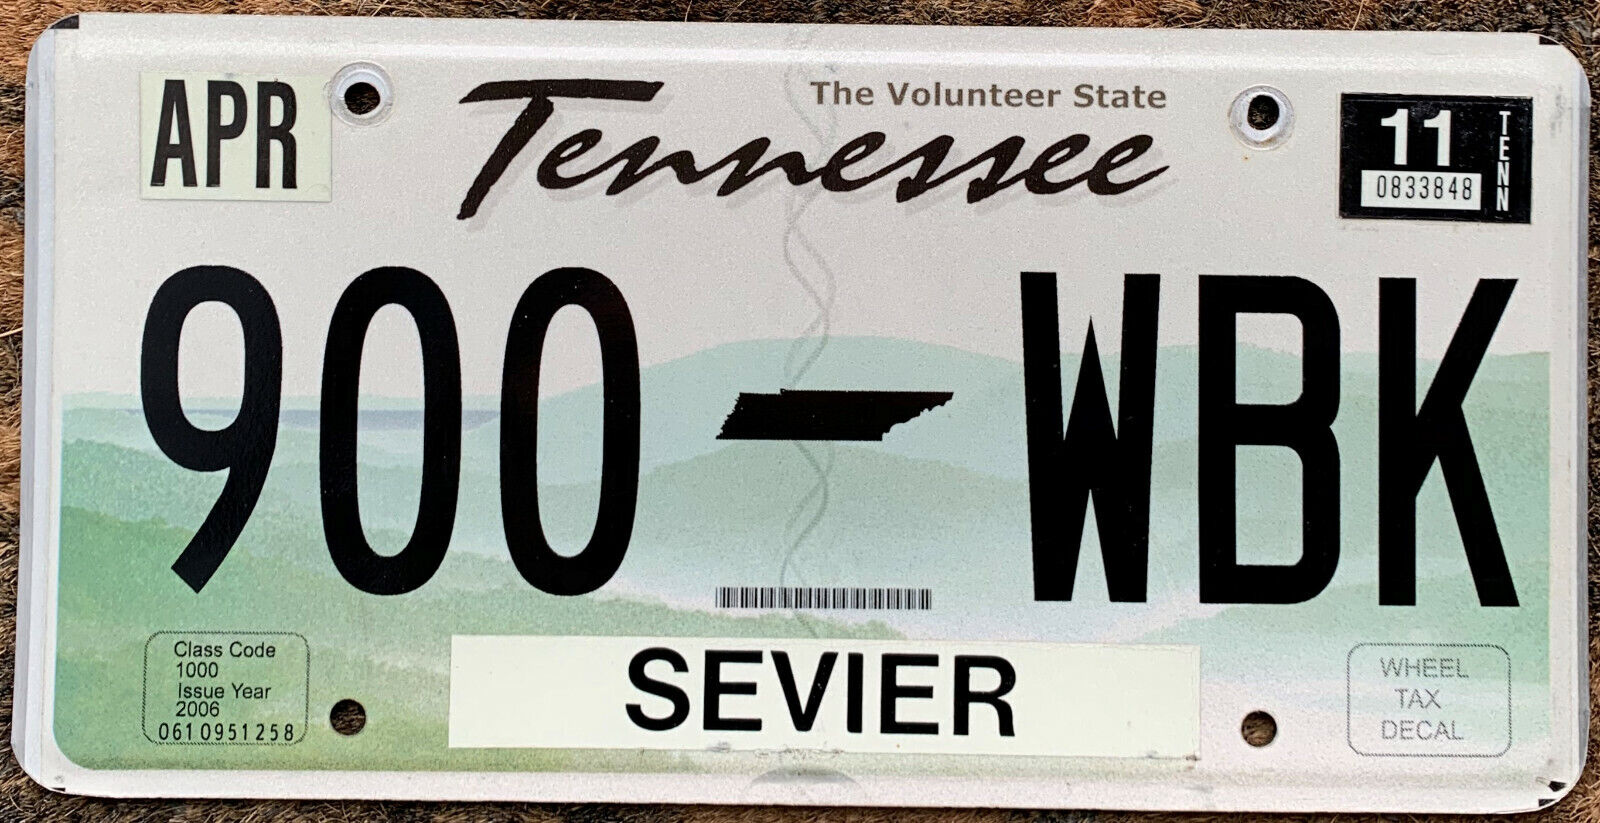 AUTHENTIC** USA 2011 TENNESSEE SEVERE COUNTY LICENSE PLATE.  